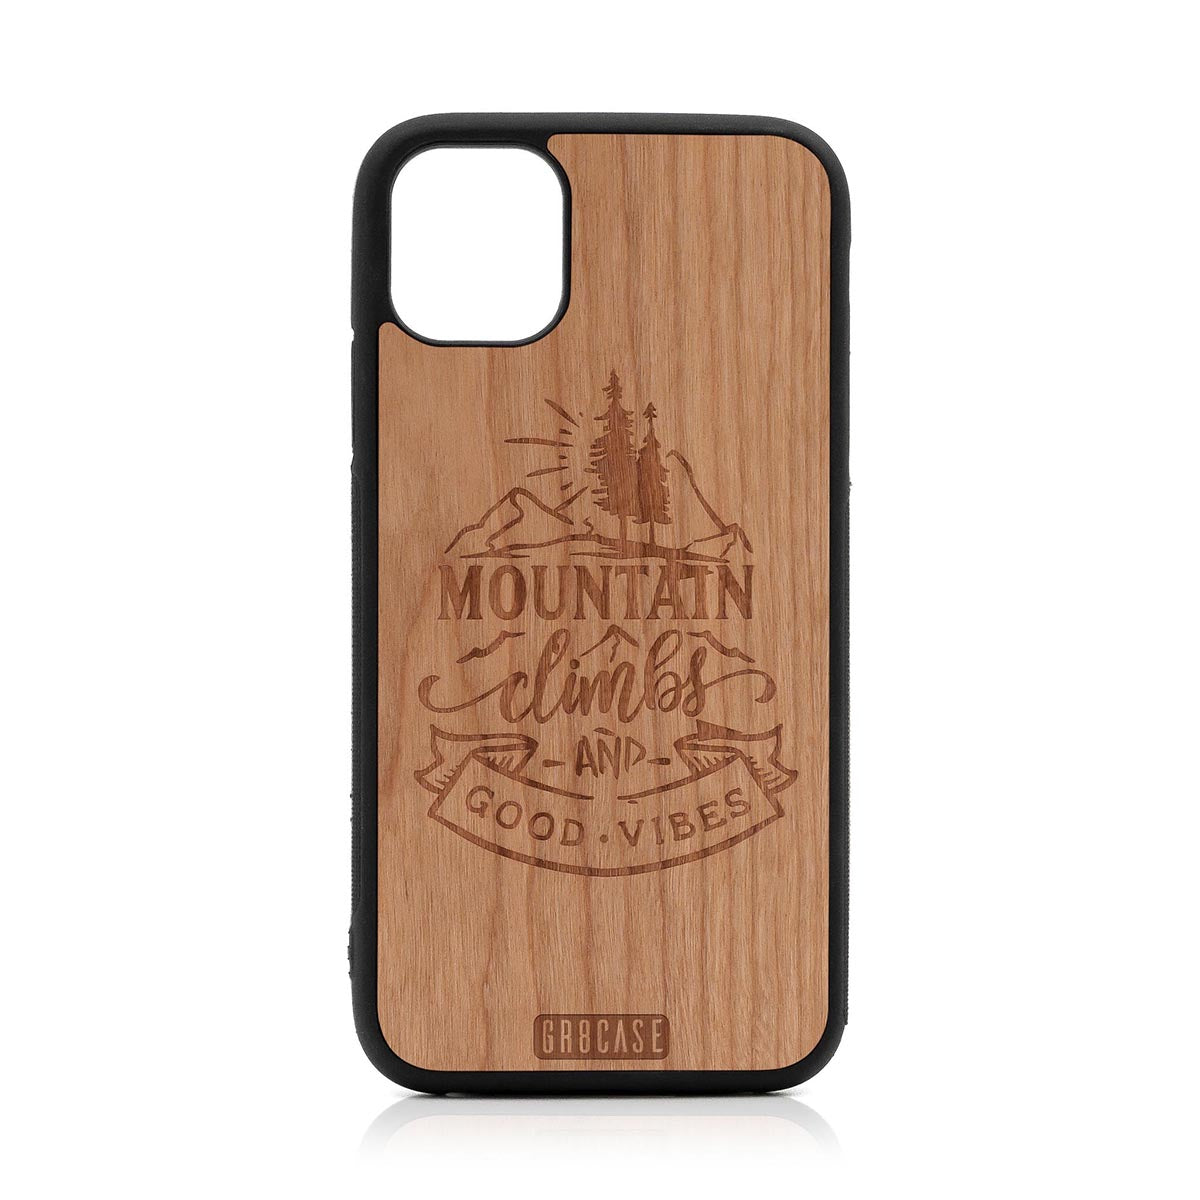 Mountain Climbs And Good Vibes Design Wood Case For iPhone 11 by GR8CASE